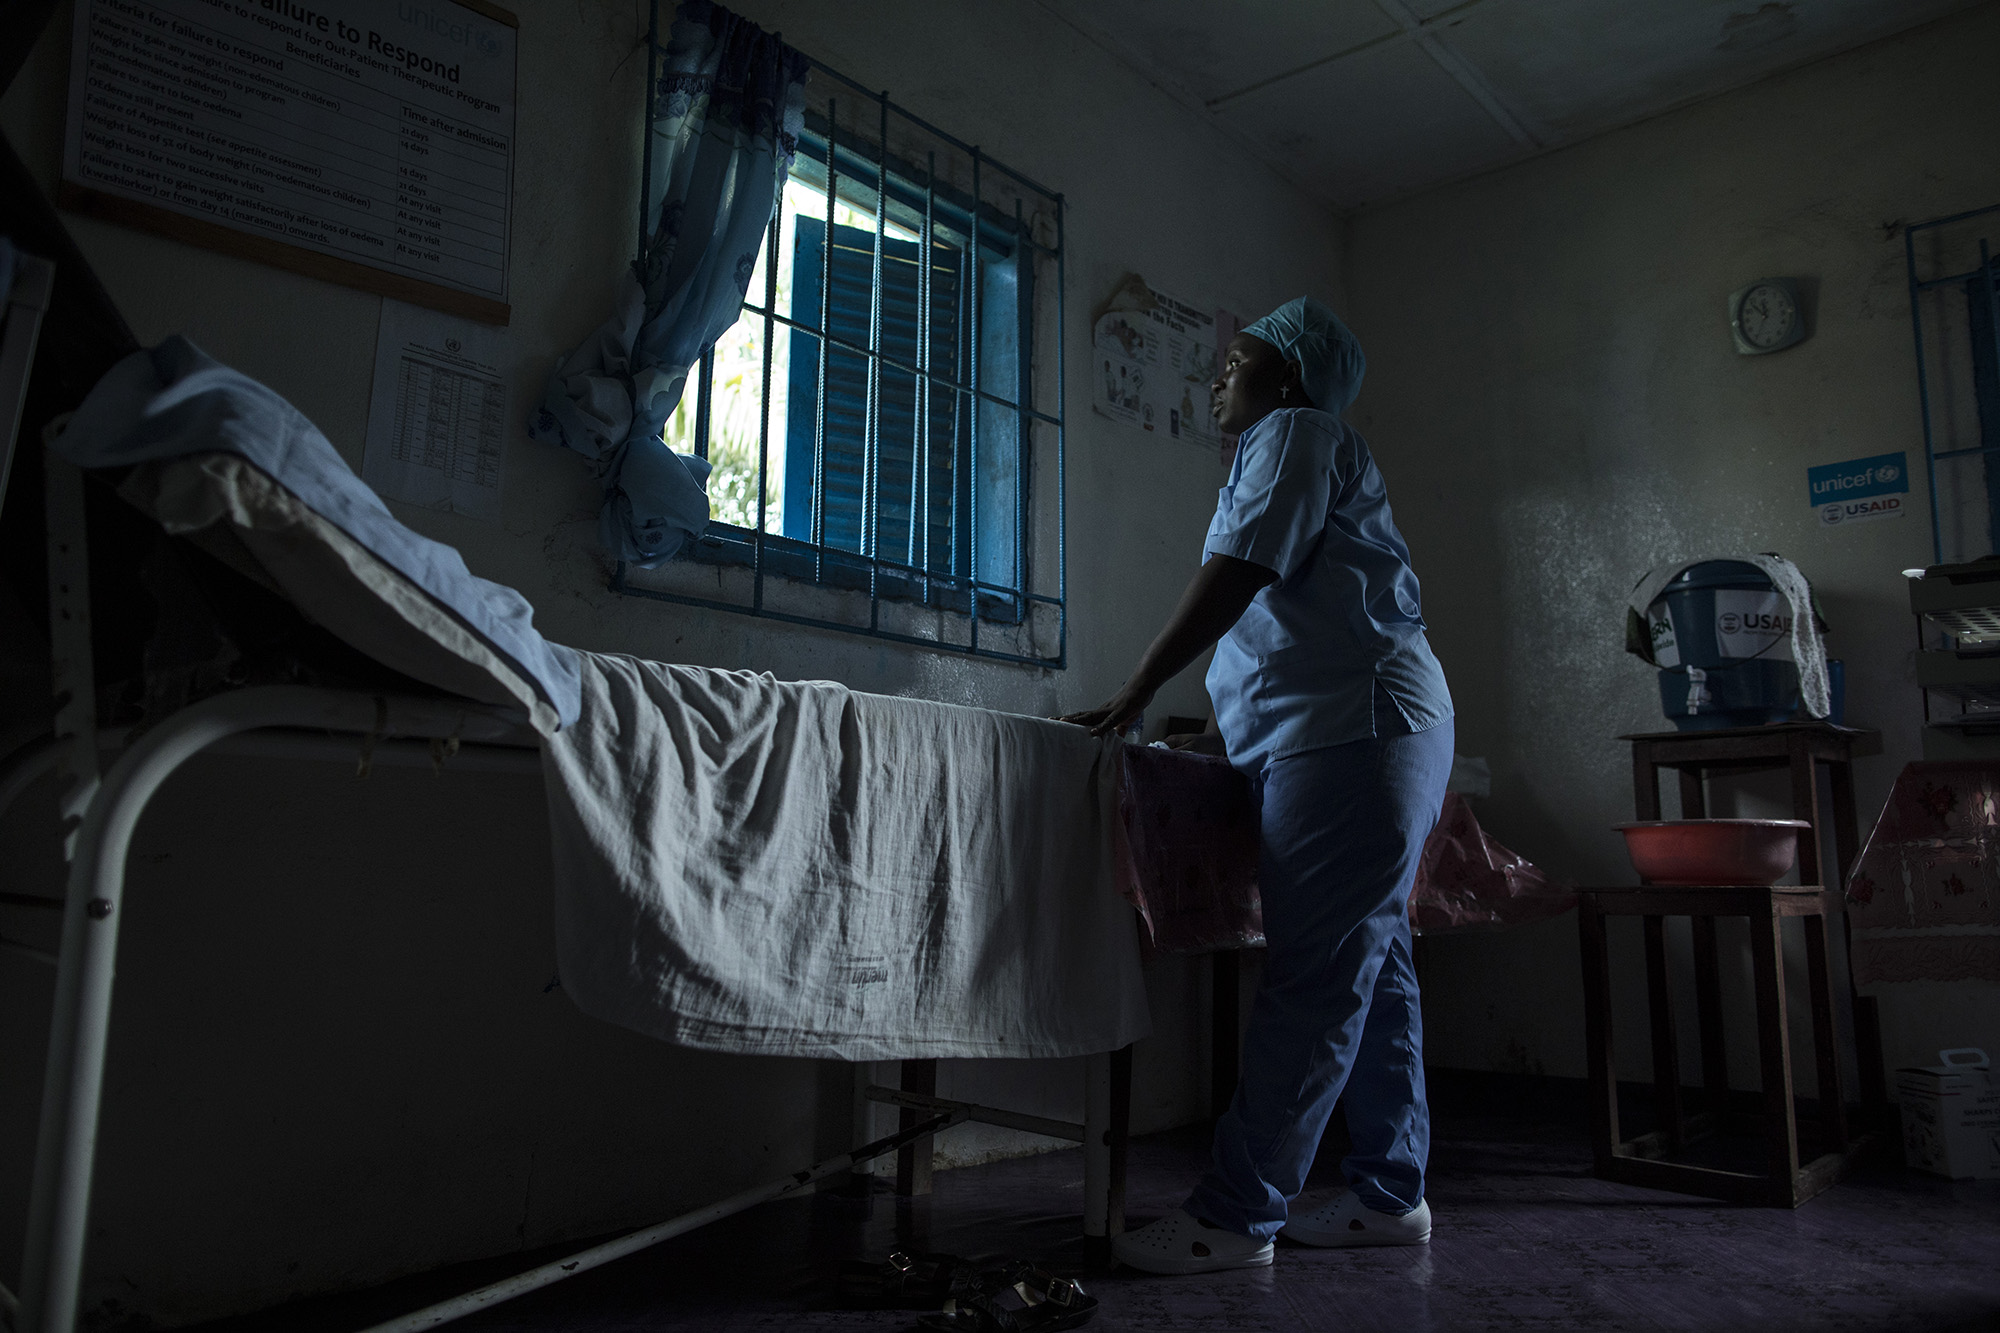  BREWERVILLE, LIBERIA: Aug. 22, 2017 - Wislyne S. Yarh Sieh is a registered nurse and Officer in Charge (OIC) at Kpallah Community Clinic in Brewerville. Wisylne worked as a healthcare worker during the Ebola outbreak in 2014-2015. Healthcare workers